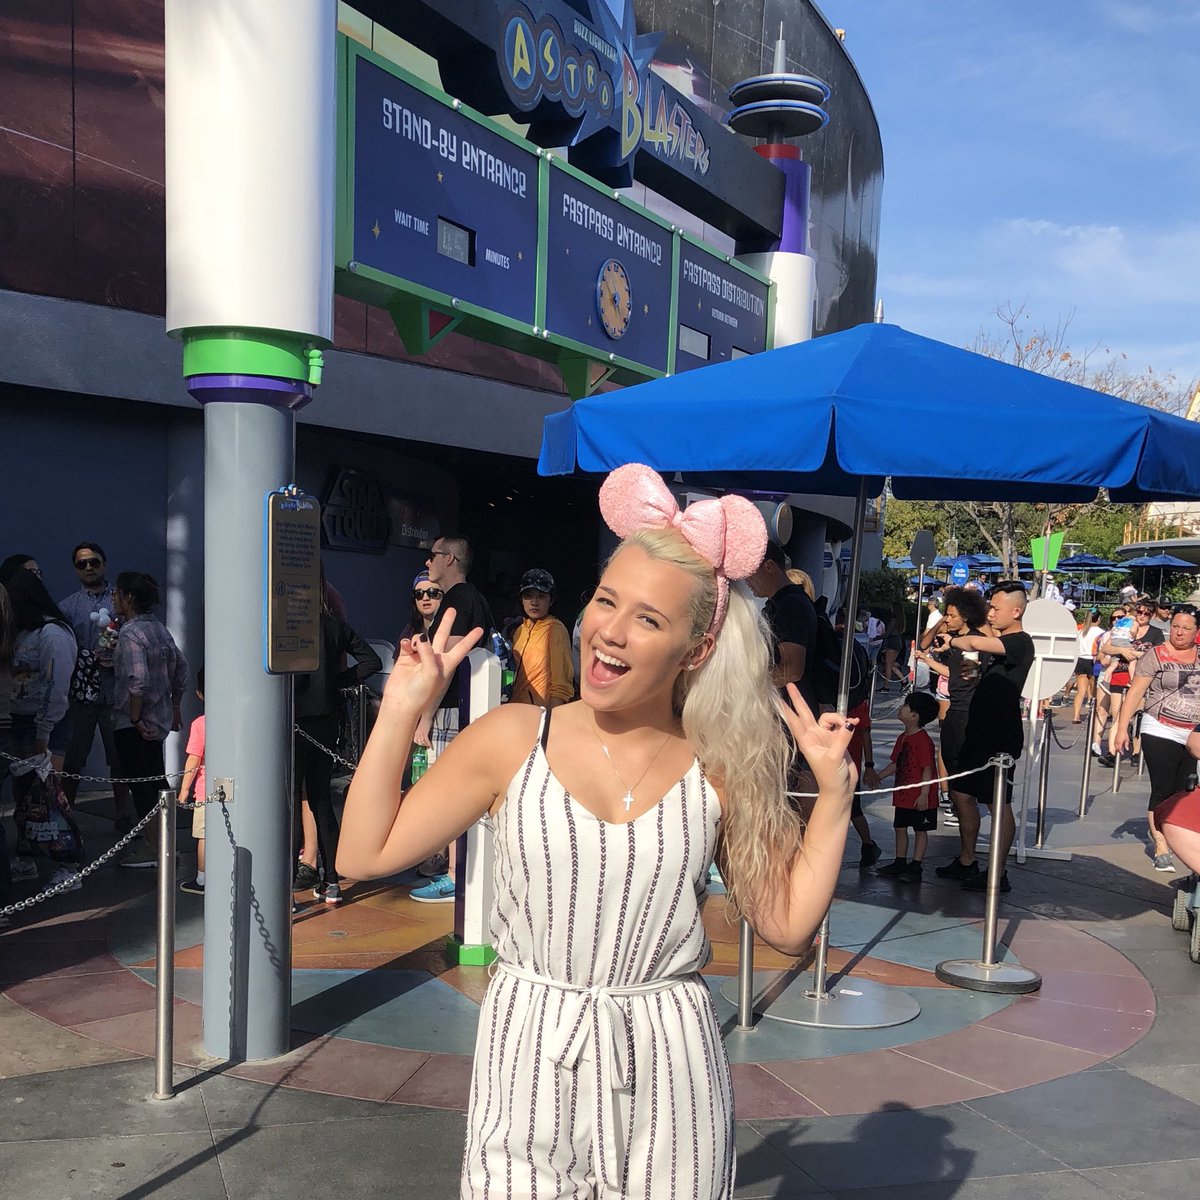 Gabby Barrett at Disneyland with American Idol which aired live on April 29, 2018.
Photo credit: American Idol
